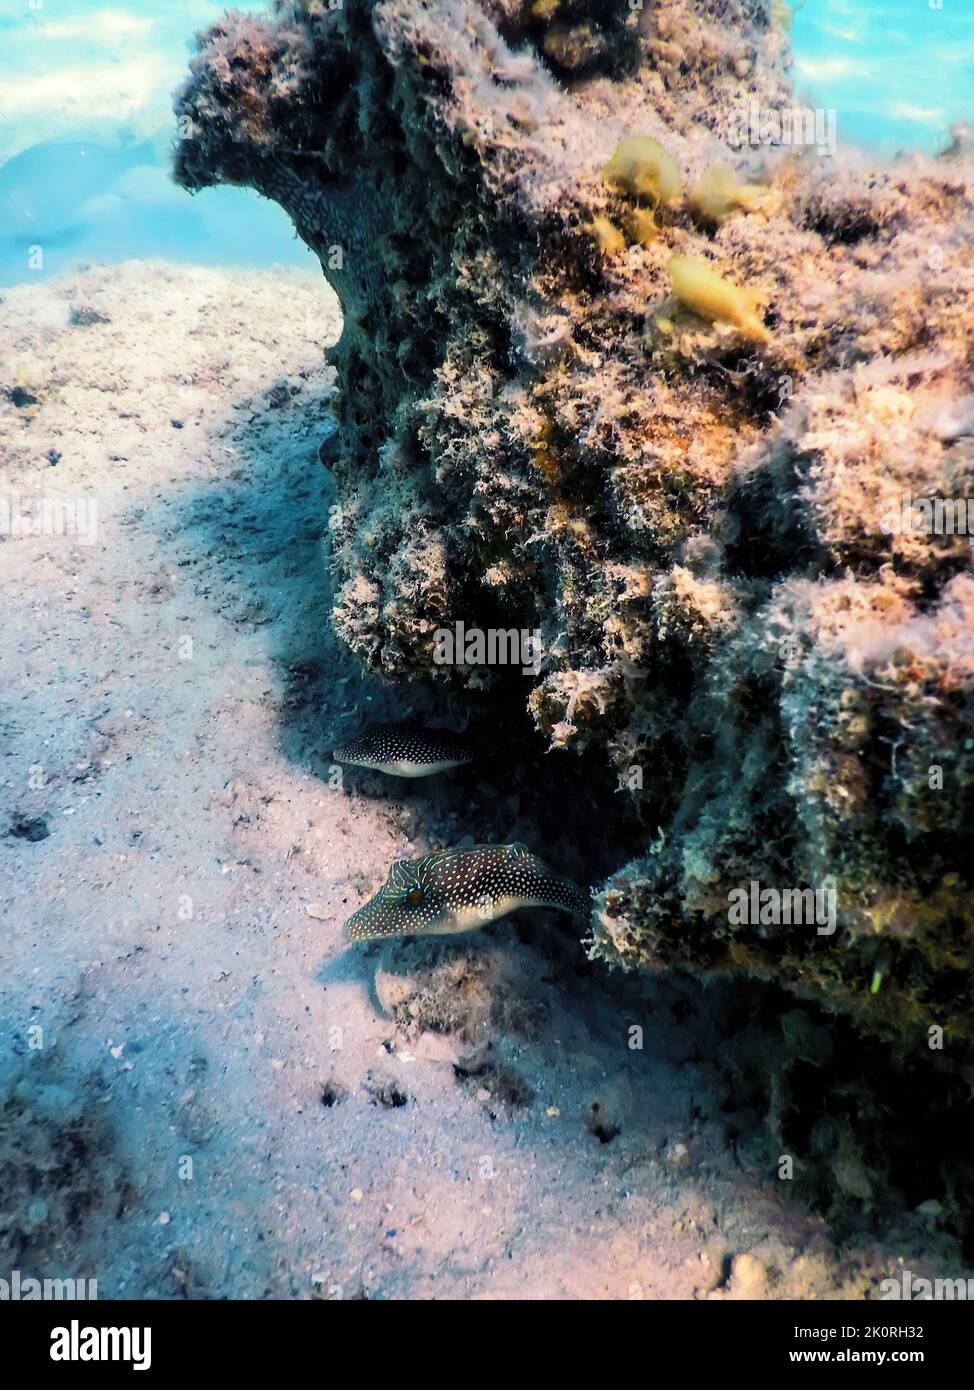 Red Sea Spotted Sharpnose (Canthigaster margaritata) underwater, Marine life Stock Photo